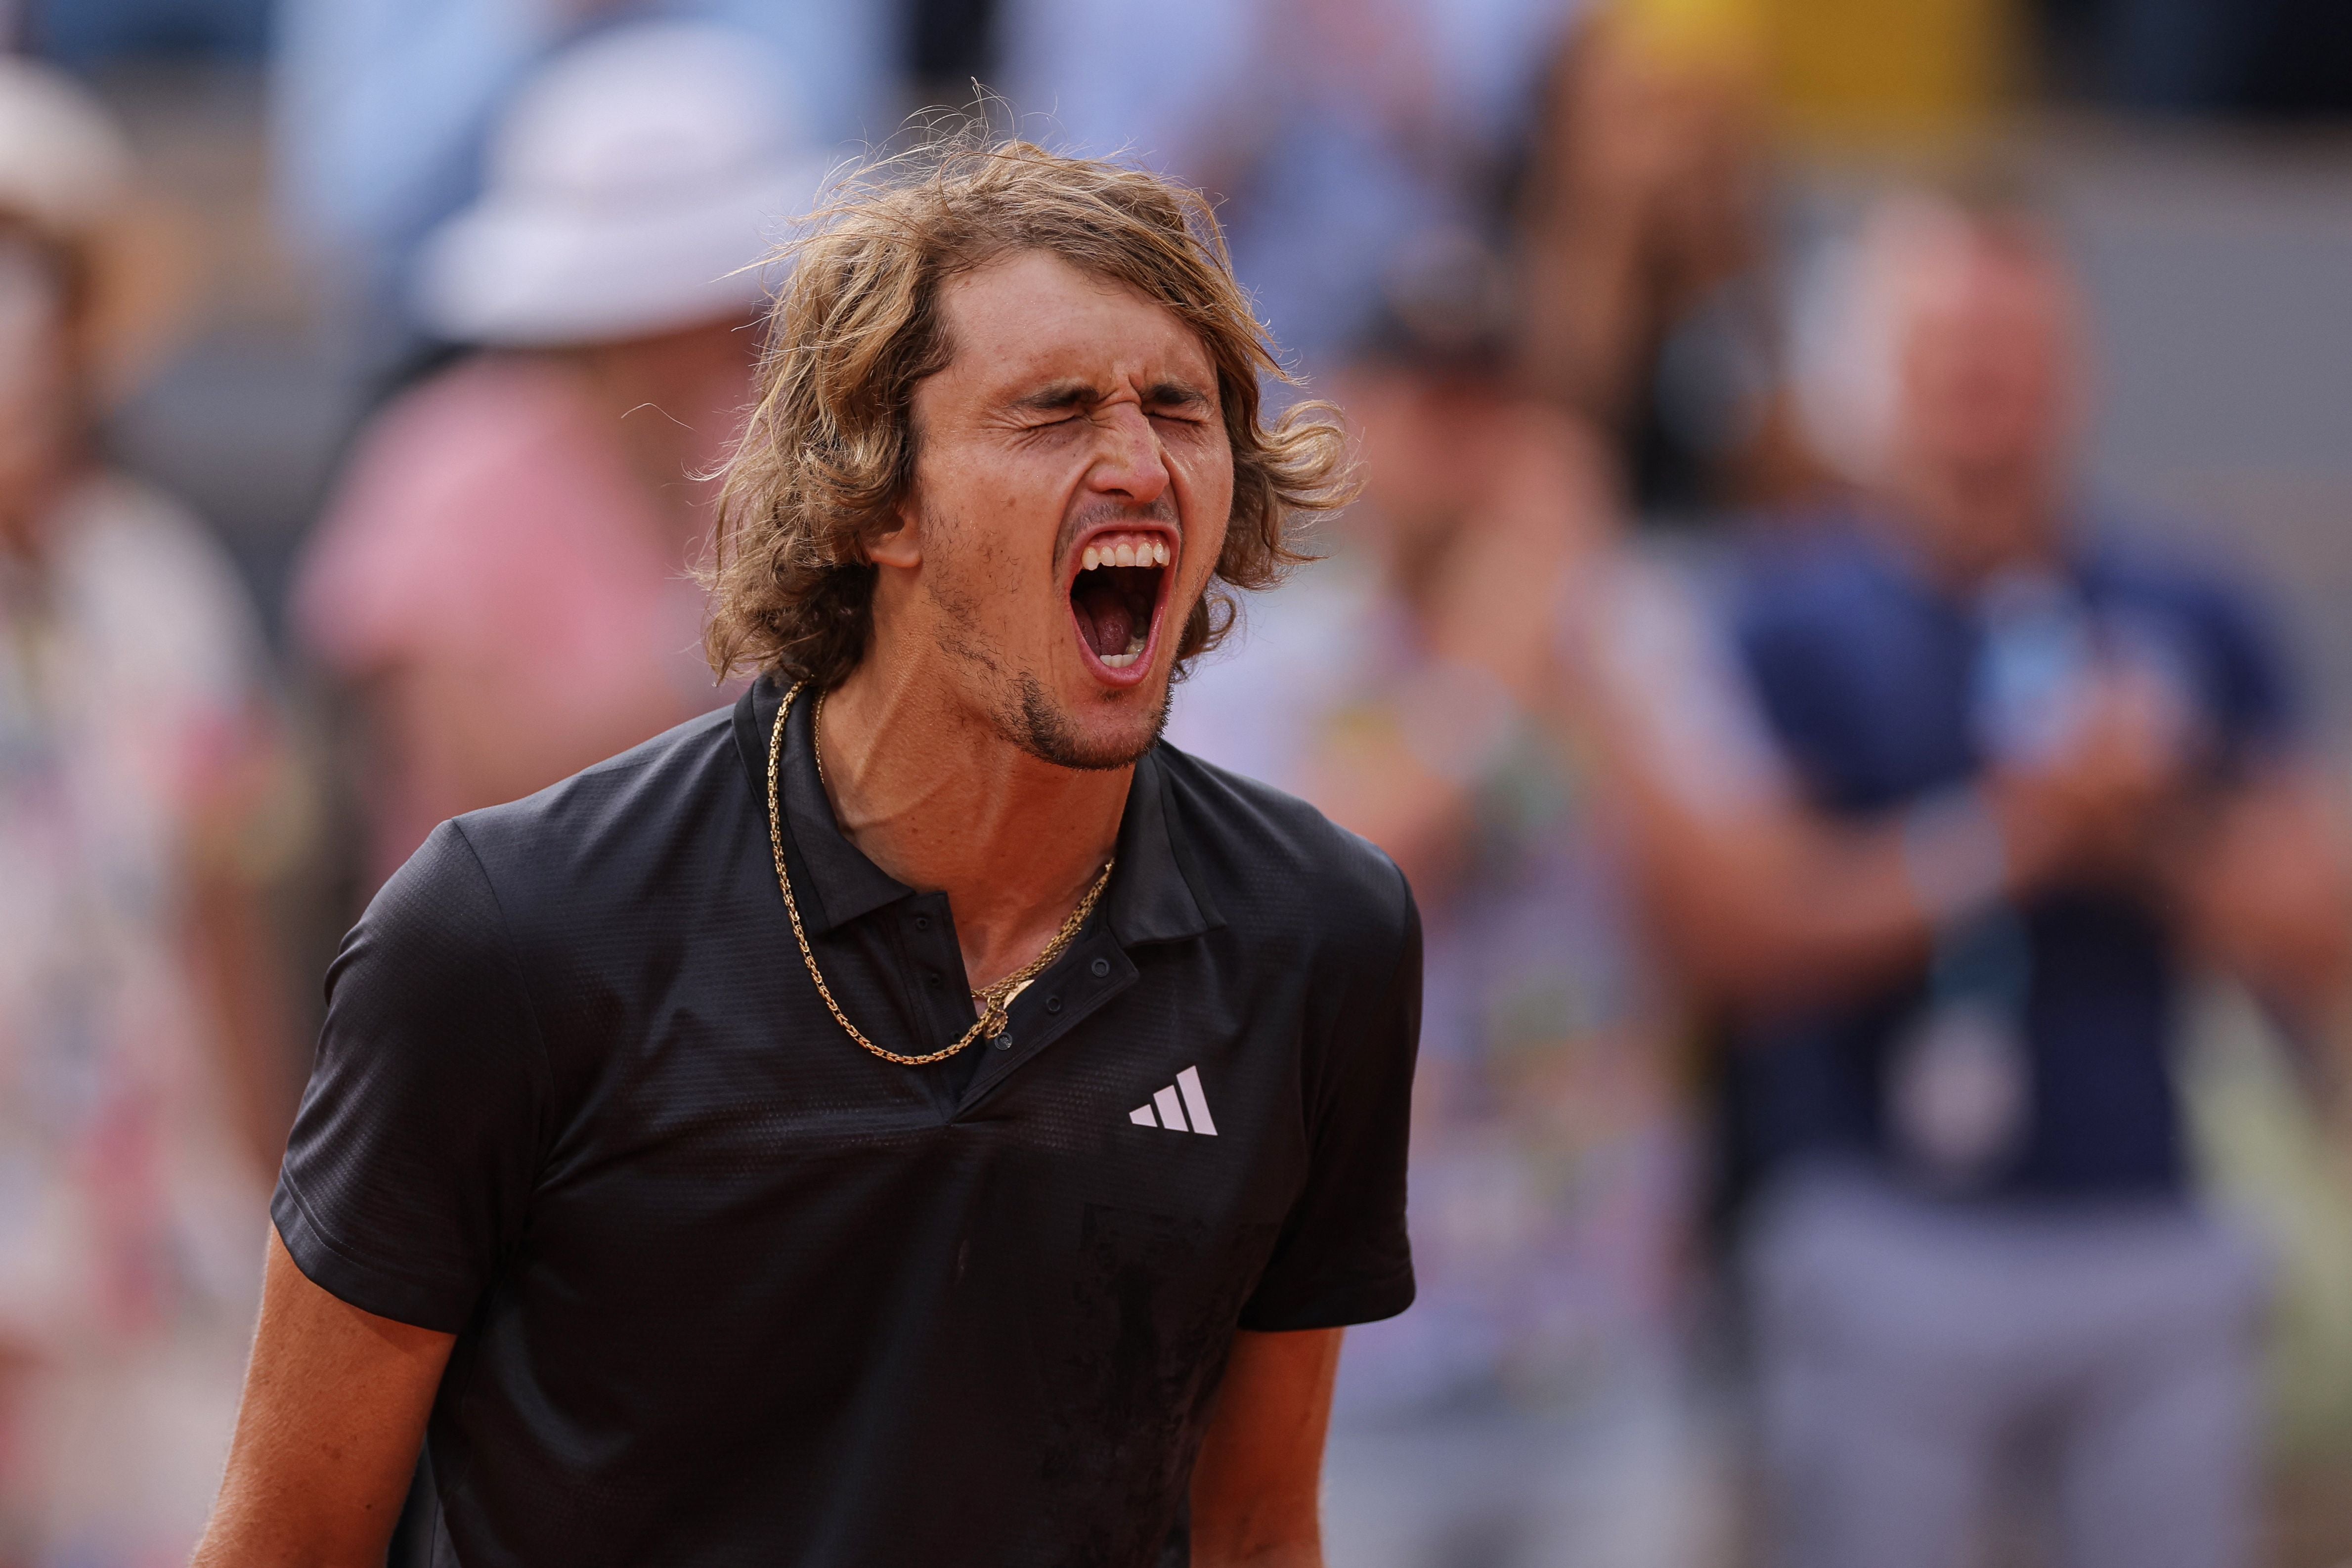 Zverev added in his press conference that he was told it looks ‘weird’ if he injects himself on the court – and that’s when I really blew a gasket